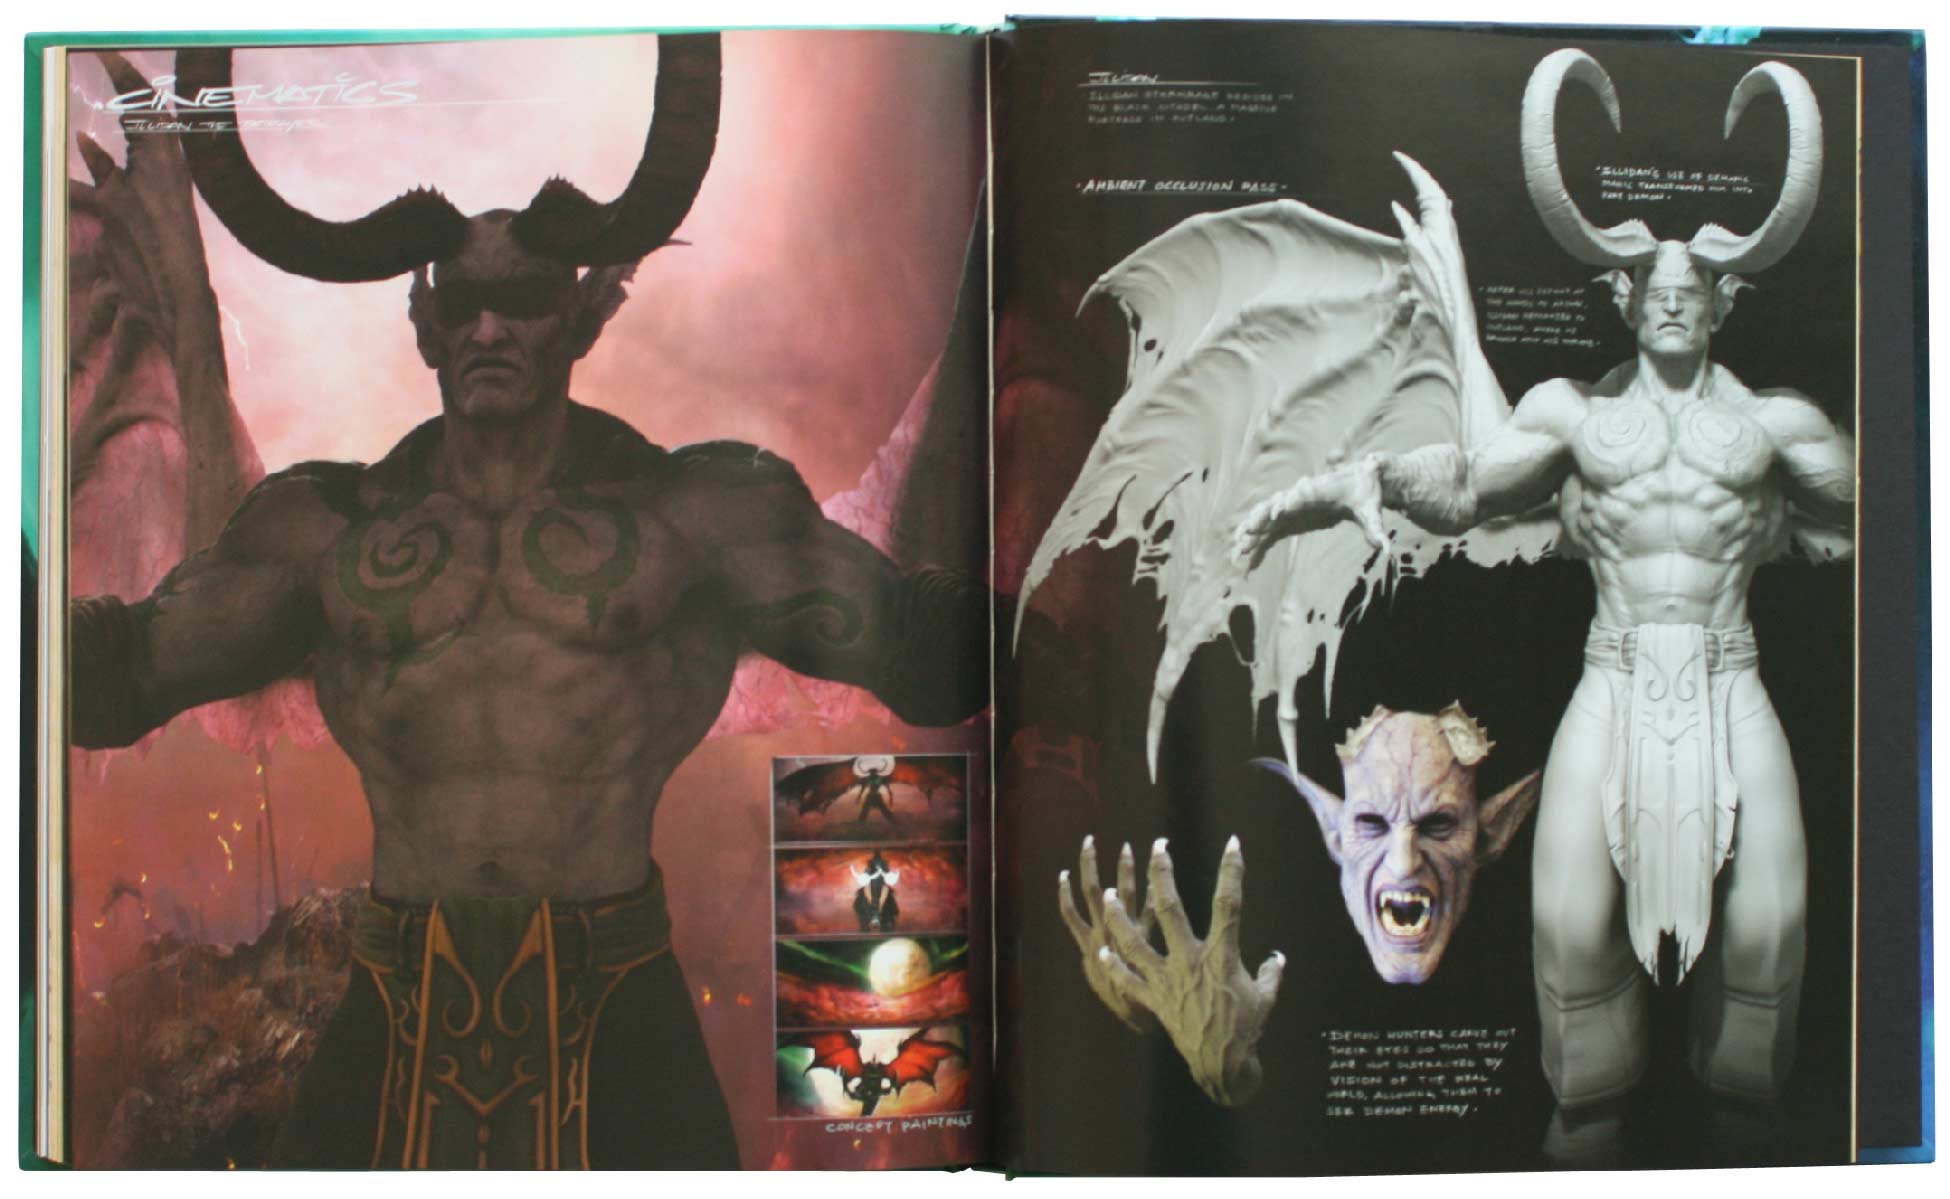 Page 194 et 195 de l'Art book : The Art of the Burning Crusade (World of Warcraft)